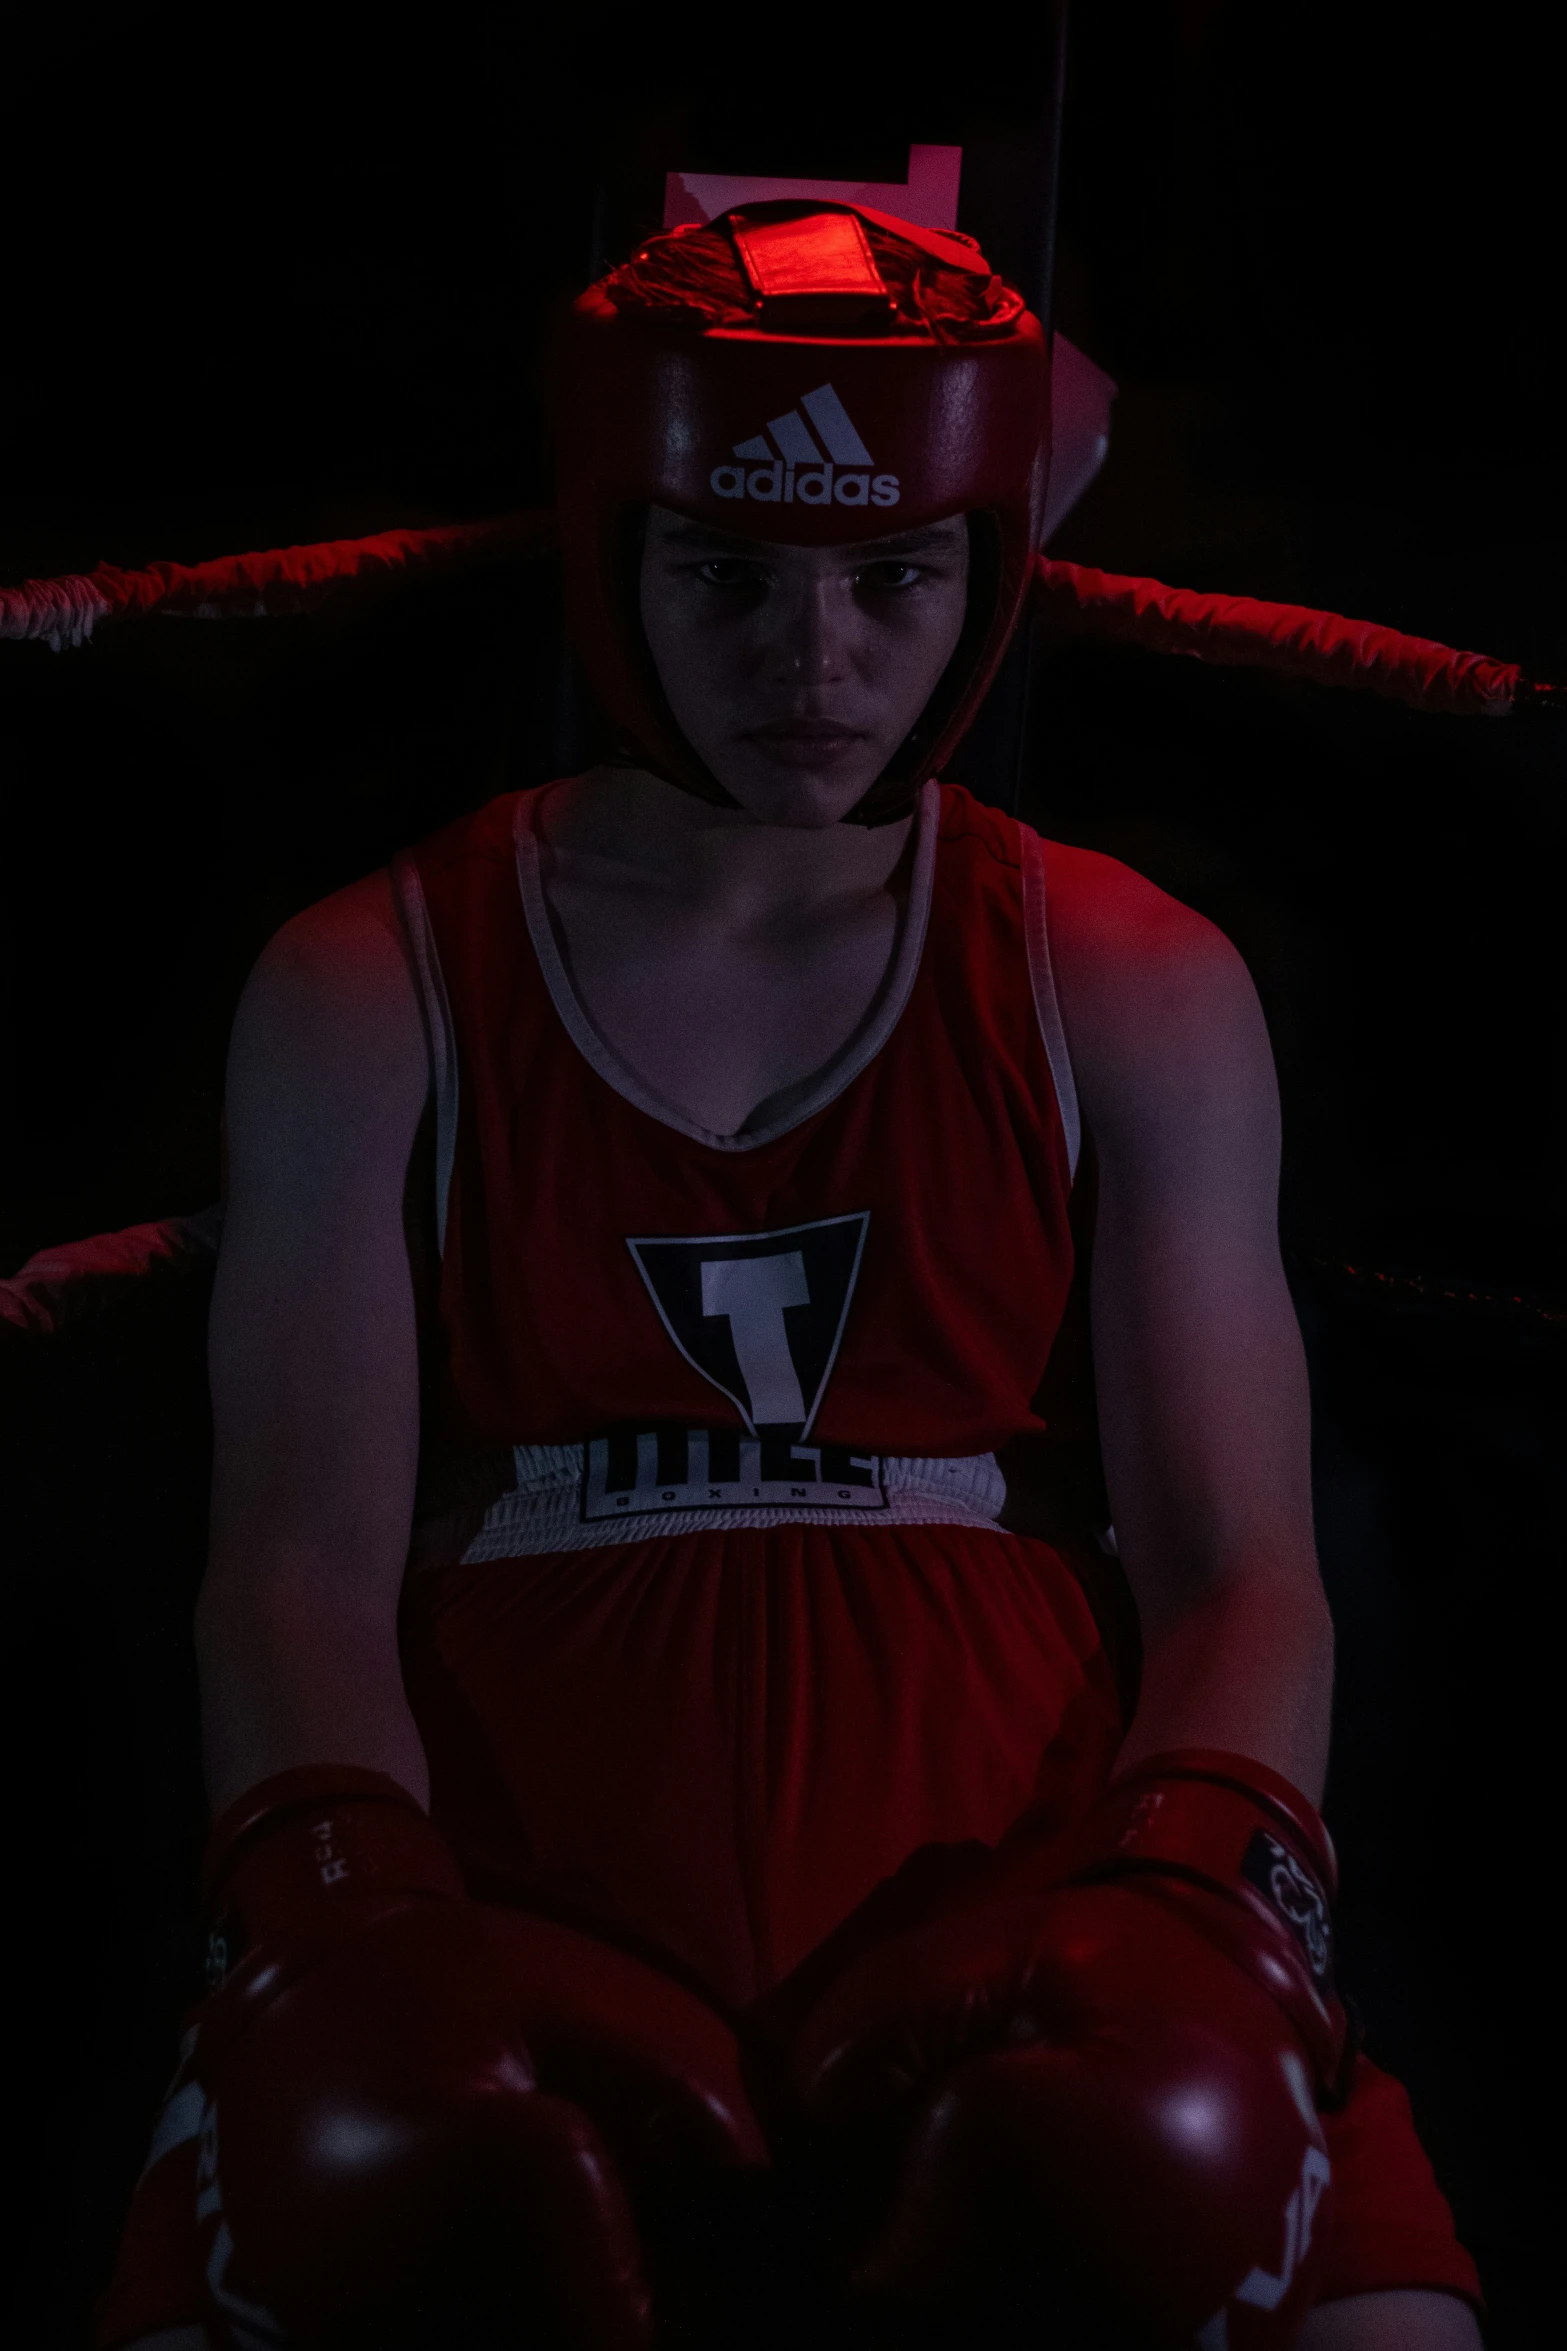 a young man sitting on a couch wearing red boxing gloves and a red helmet